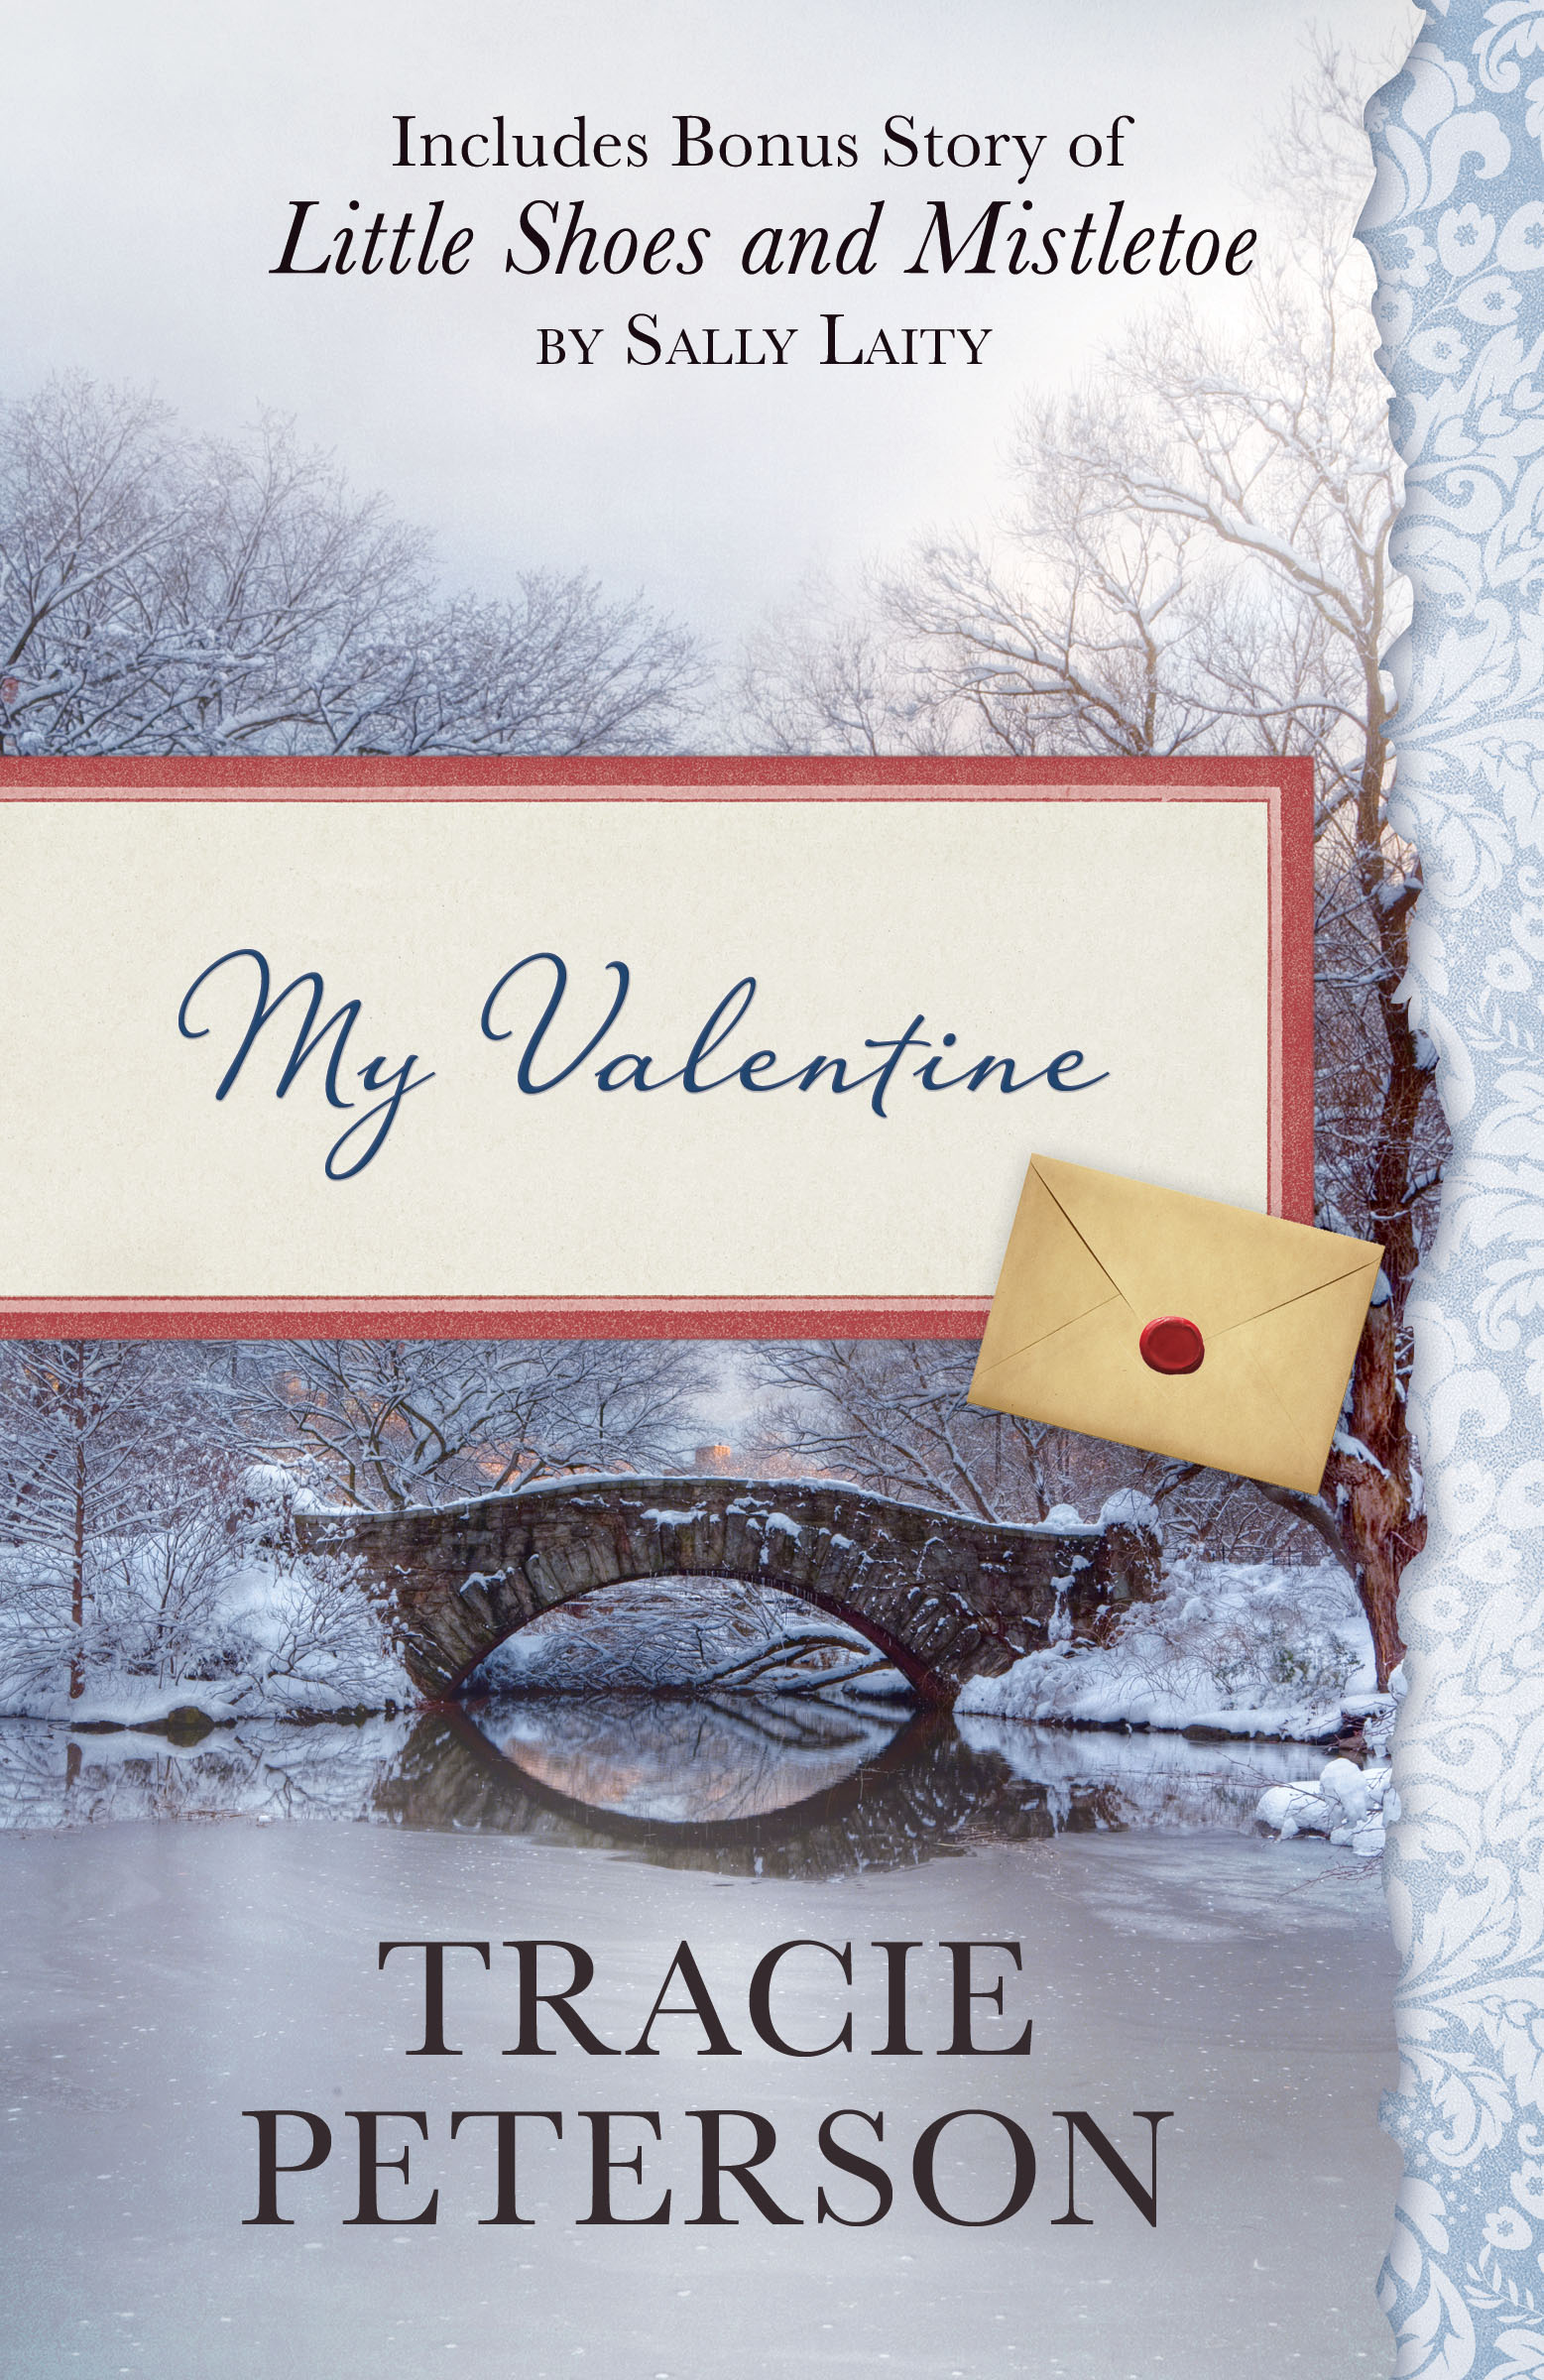 Umschlagbild für My Valentine [electronic resource] : Also Includes Bonus Story of Little Shoes and Mistletoe by Sally Laity